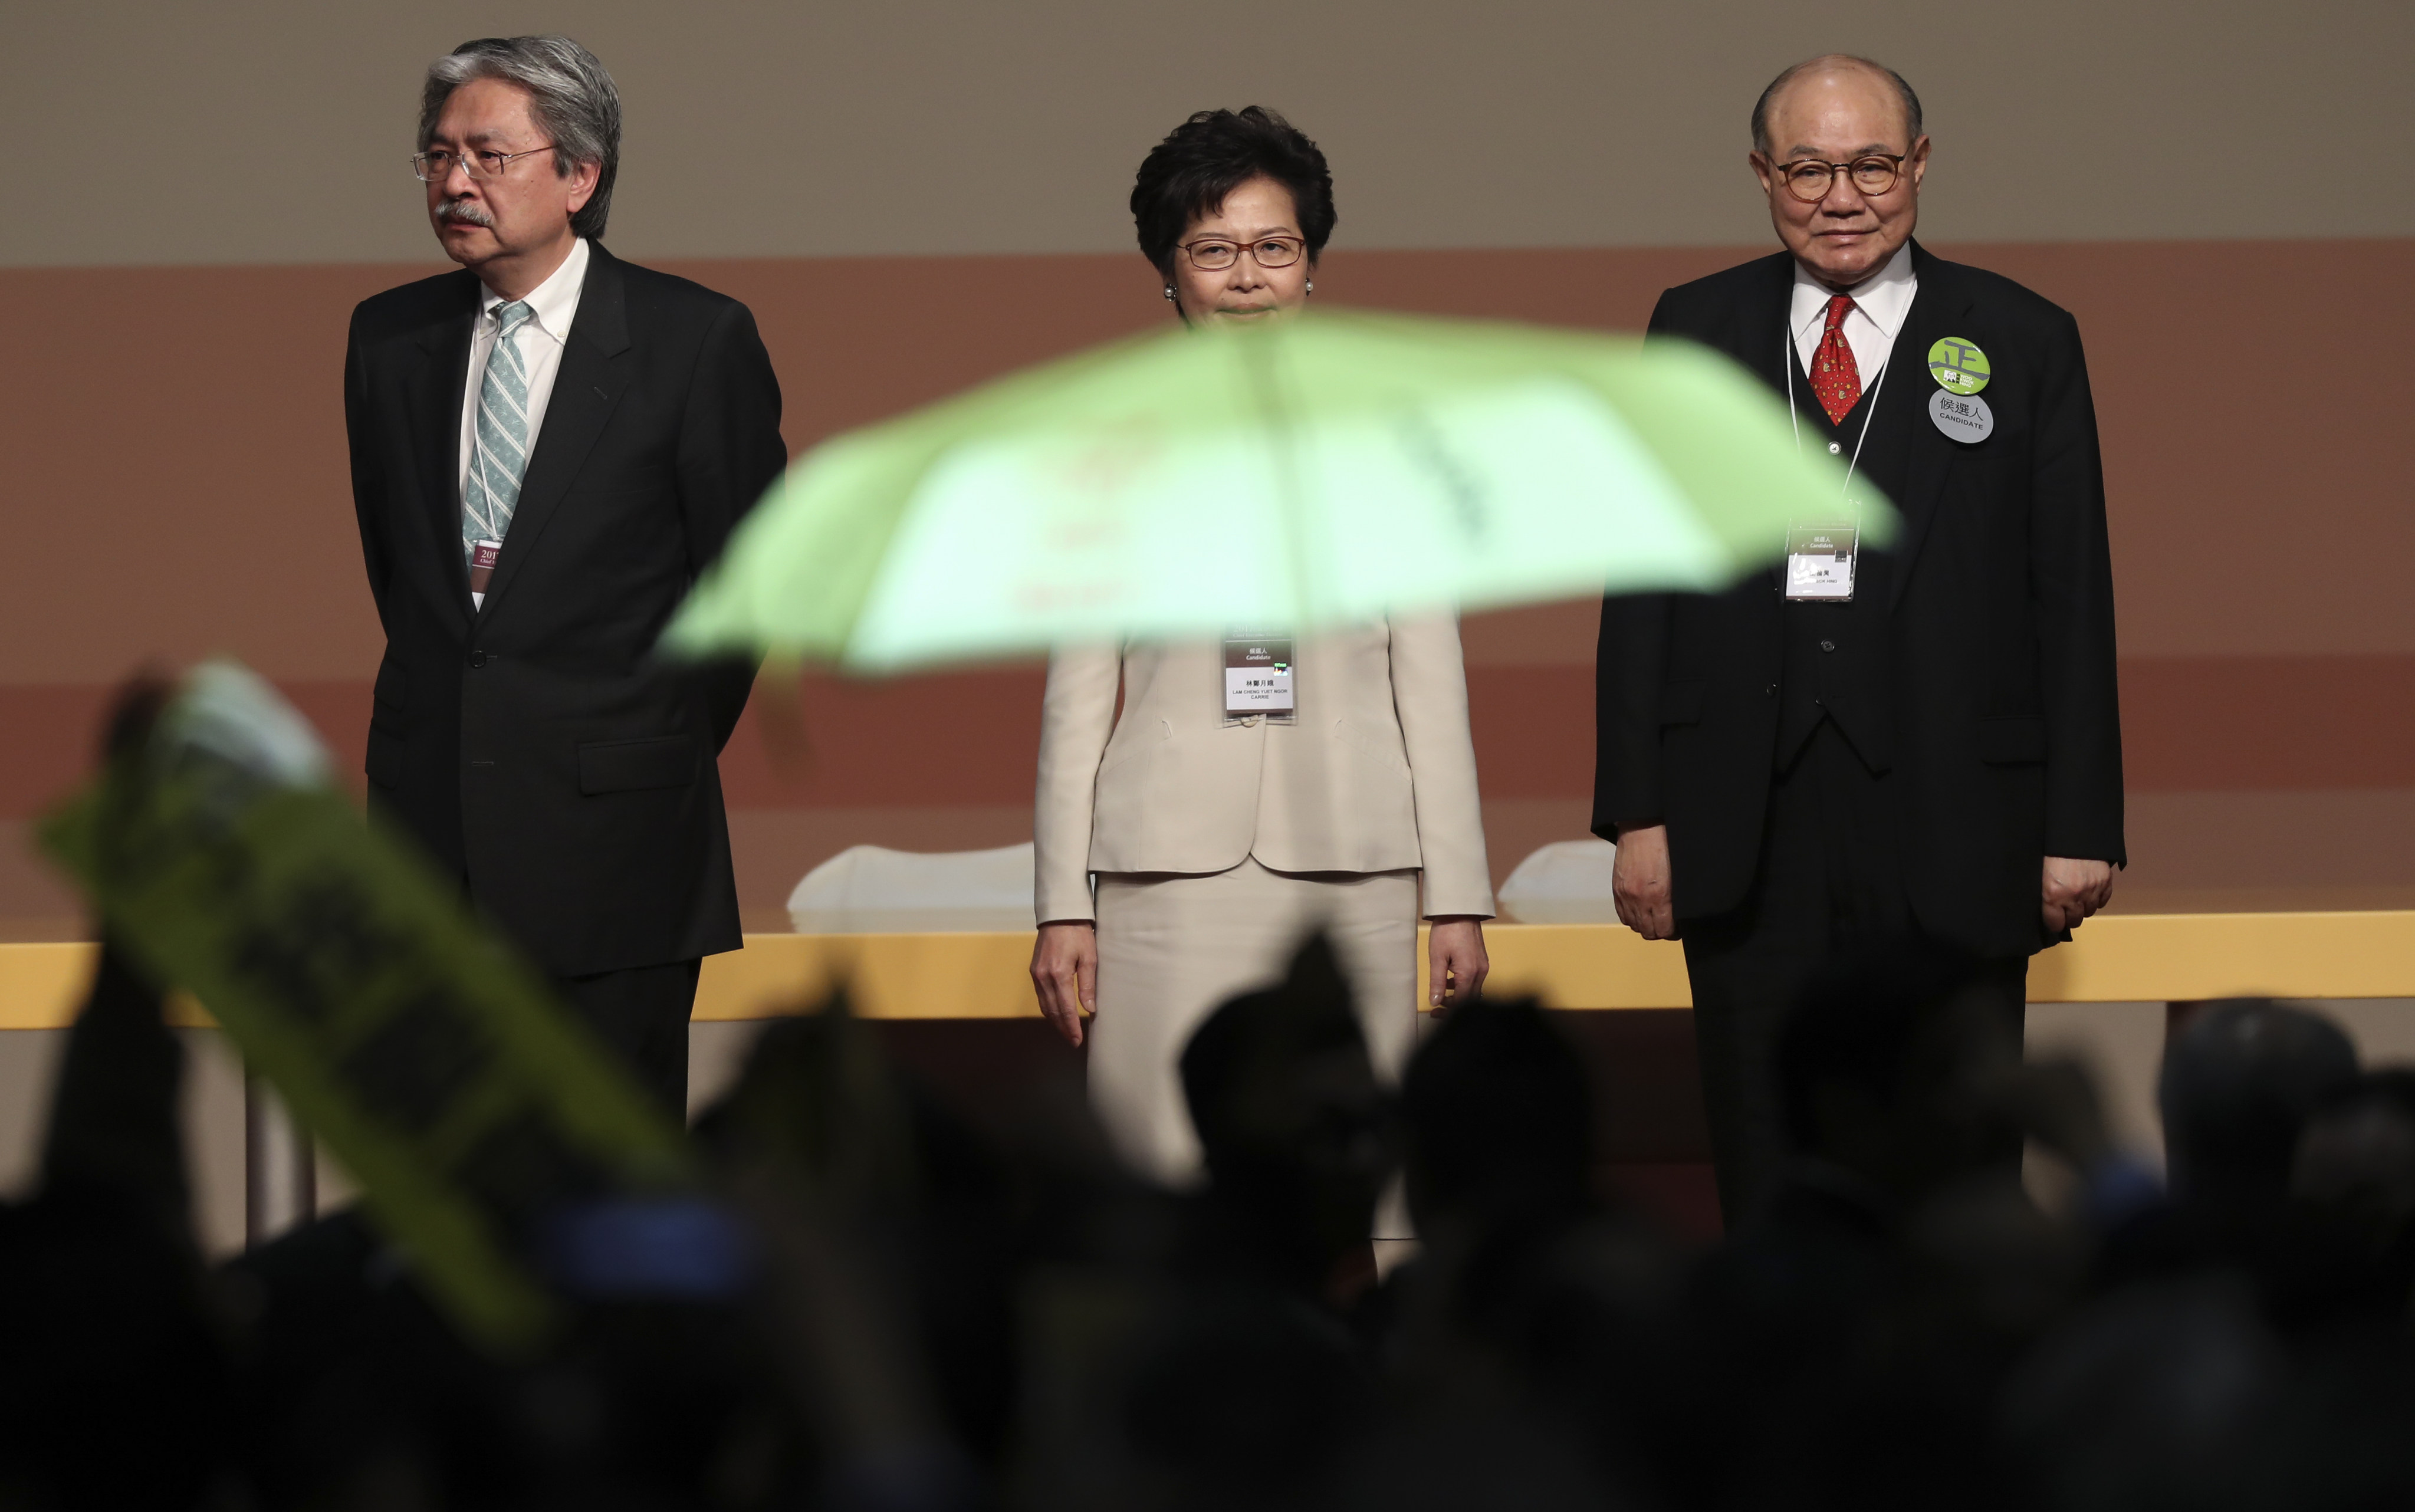 Carrie Lam (centre) wins the chief executive race on March 26, 2017, beating John Tsang (left) and retired judge Woo Kwok-hing. Photo: Robert Ng